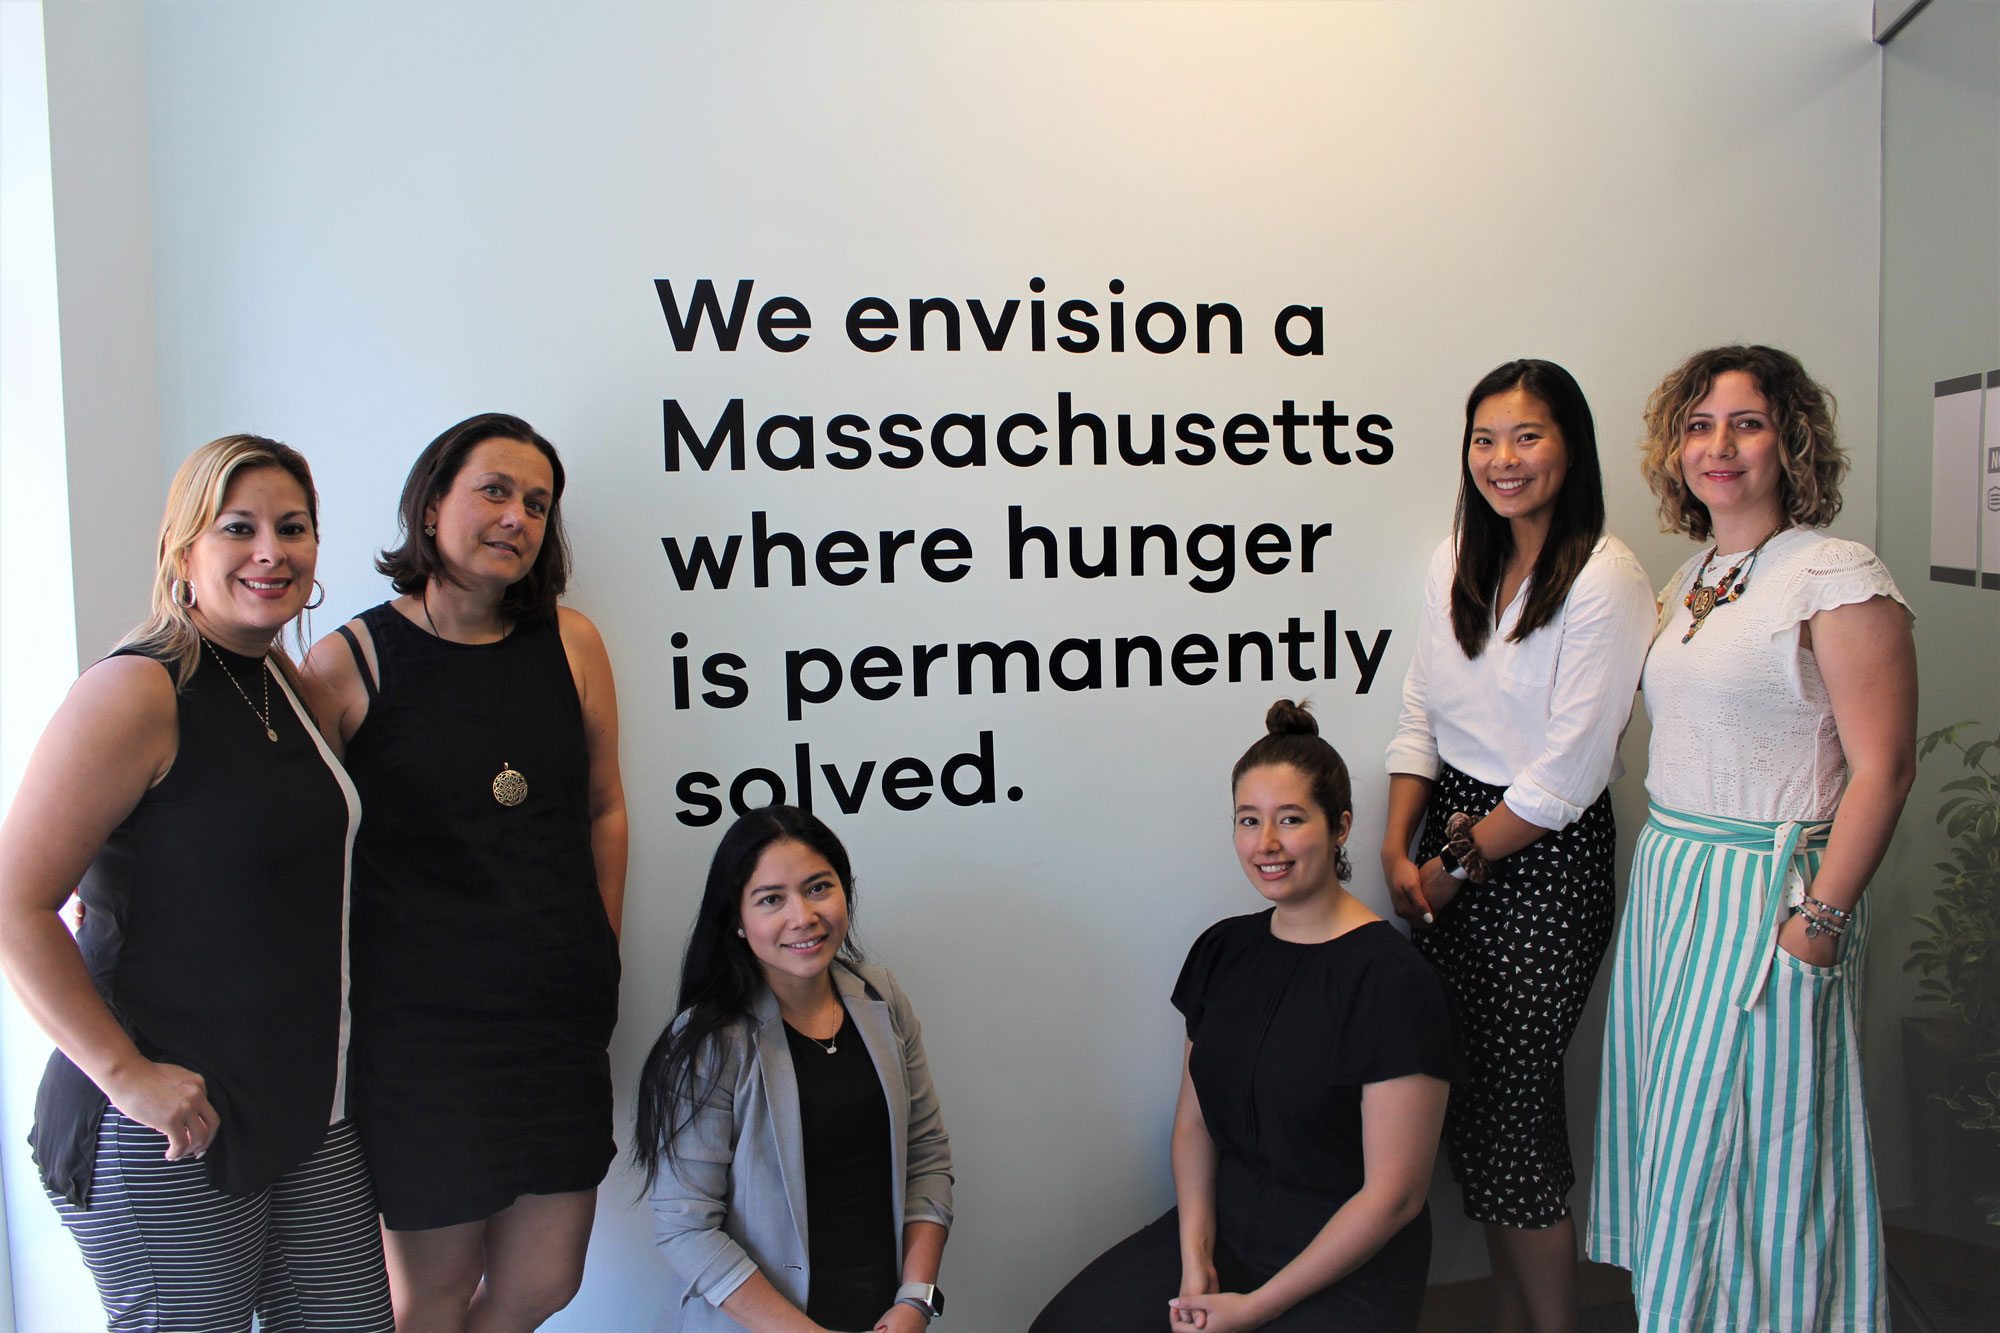 Project Bread’s Flexible Services Program Office Team stands near statement on the wall that reads, “We envision a Massachusetts where huger is permanently solved.”